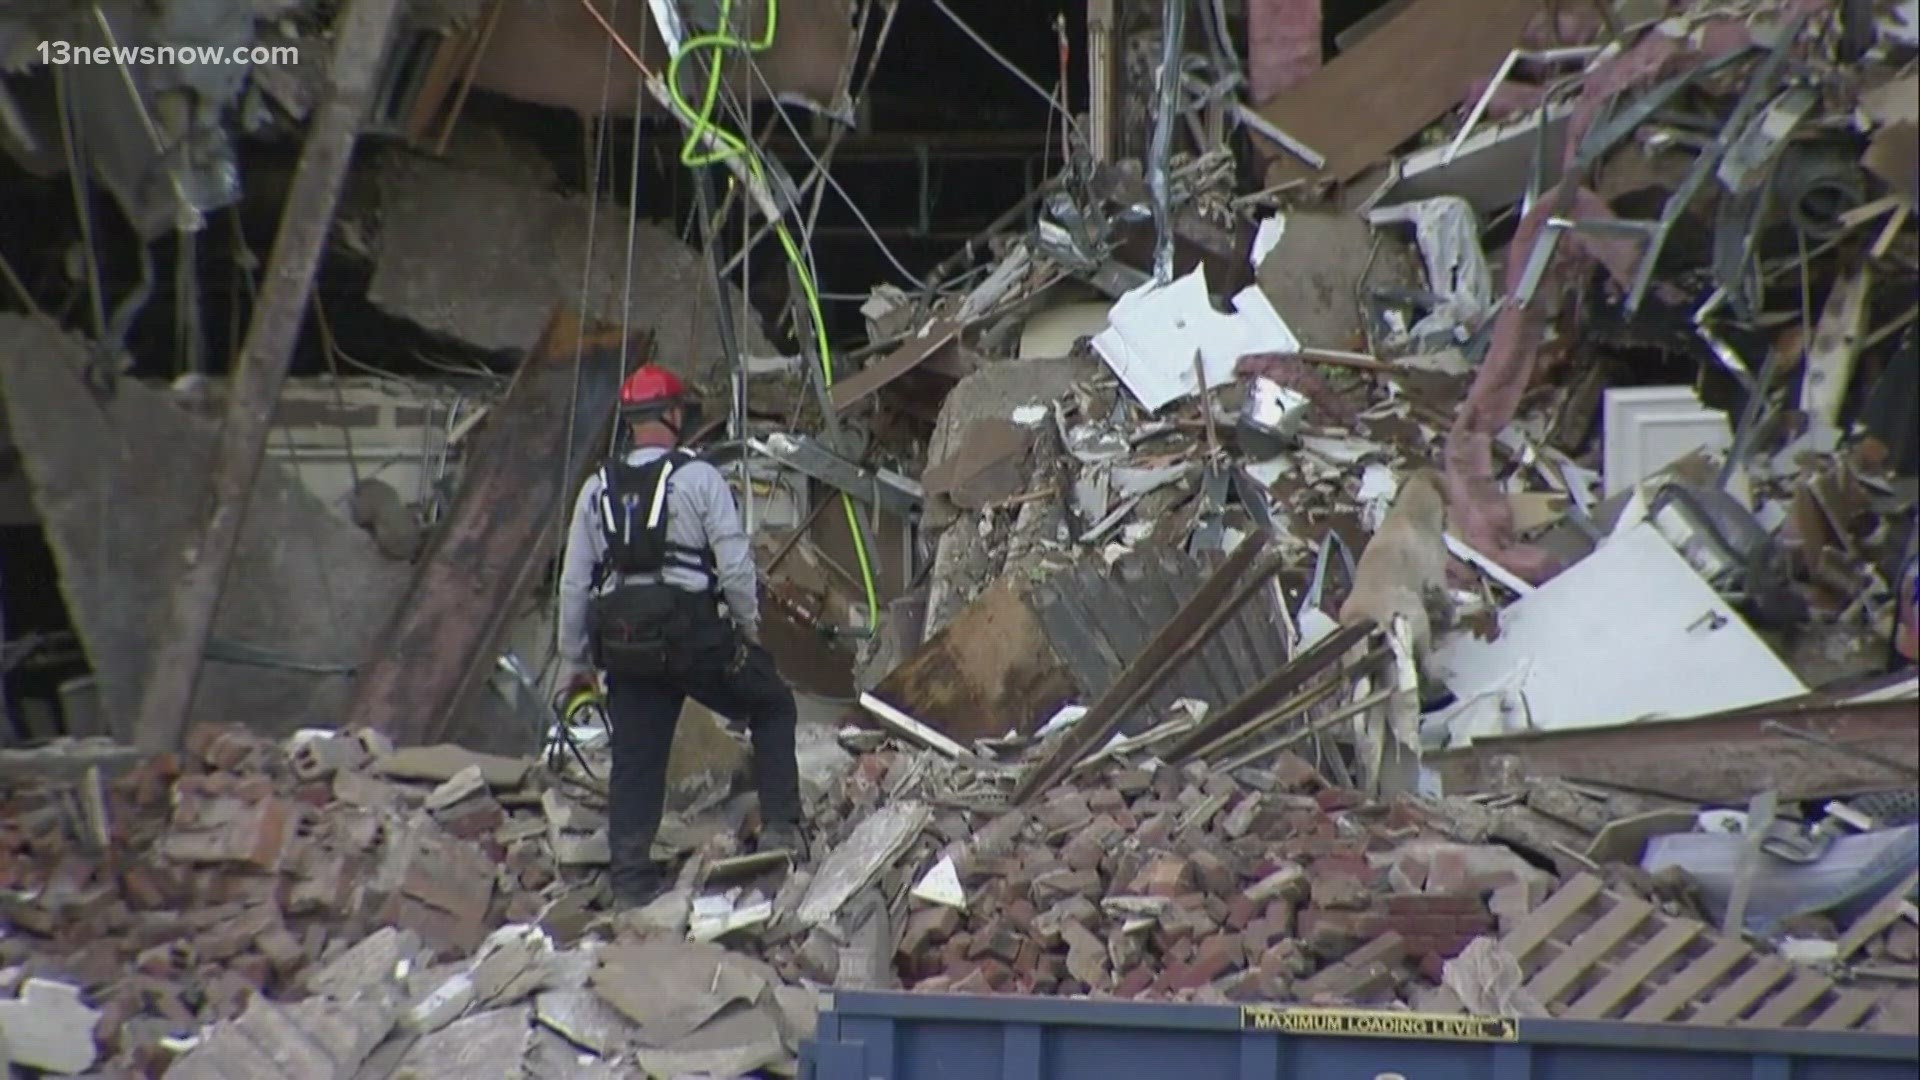 At least eight people have been rescued from this apartment building after it collapsed on Sunday.